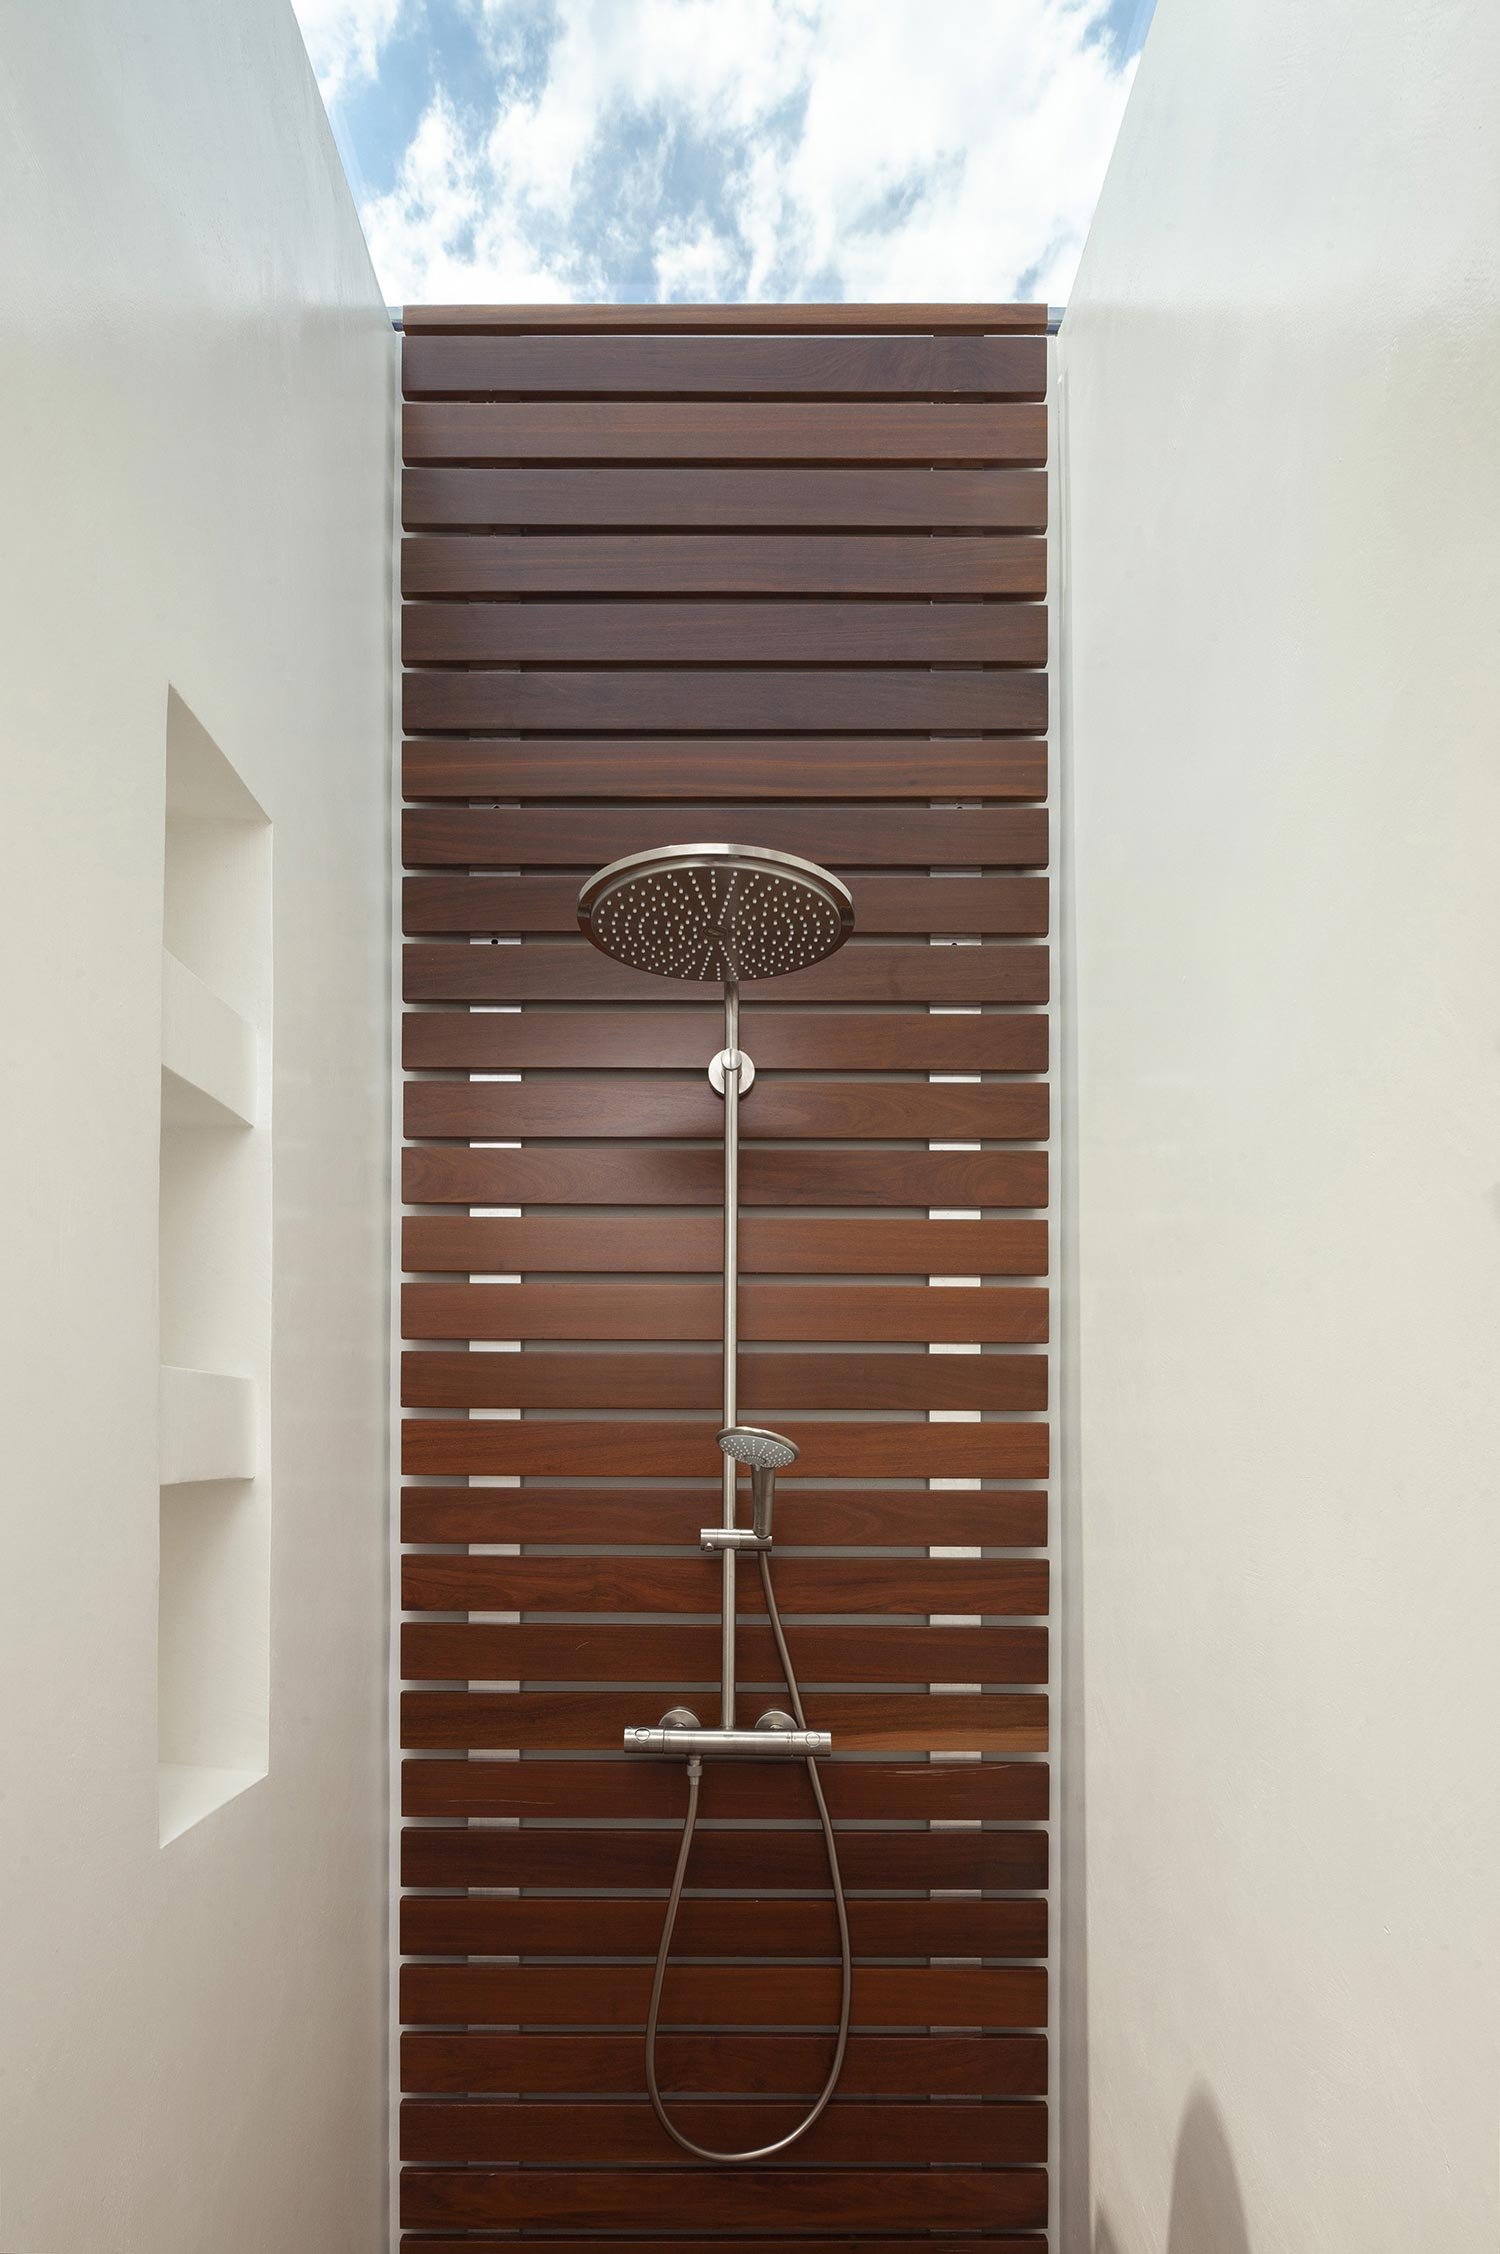 Shower with iroko decking and build in niches